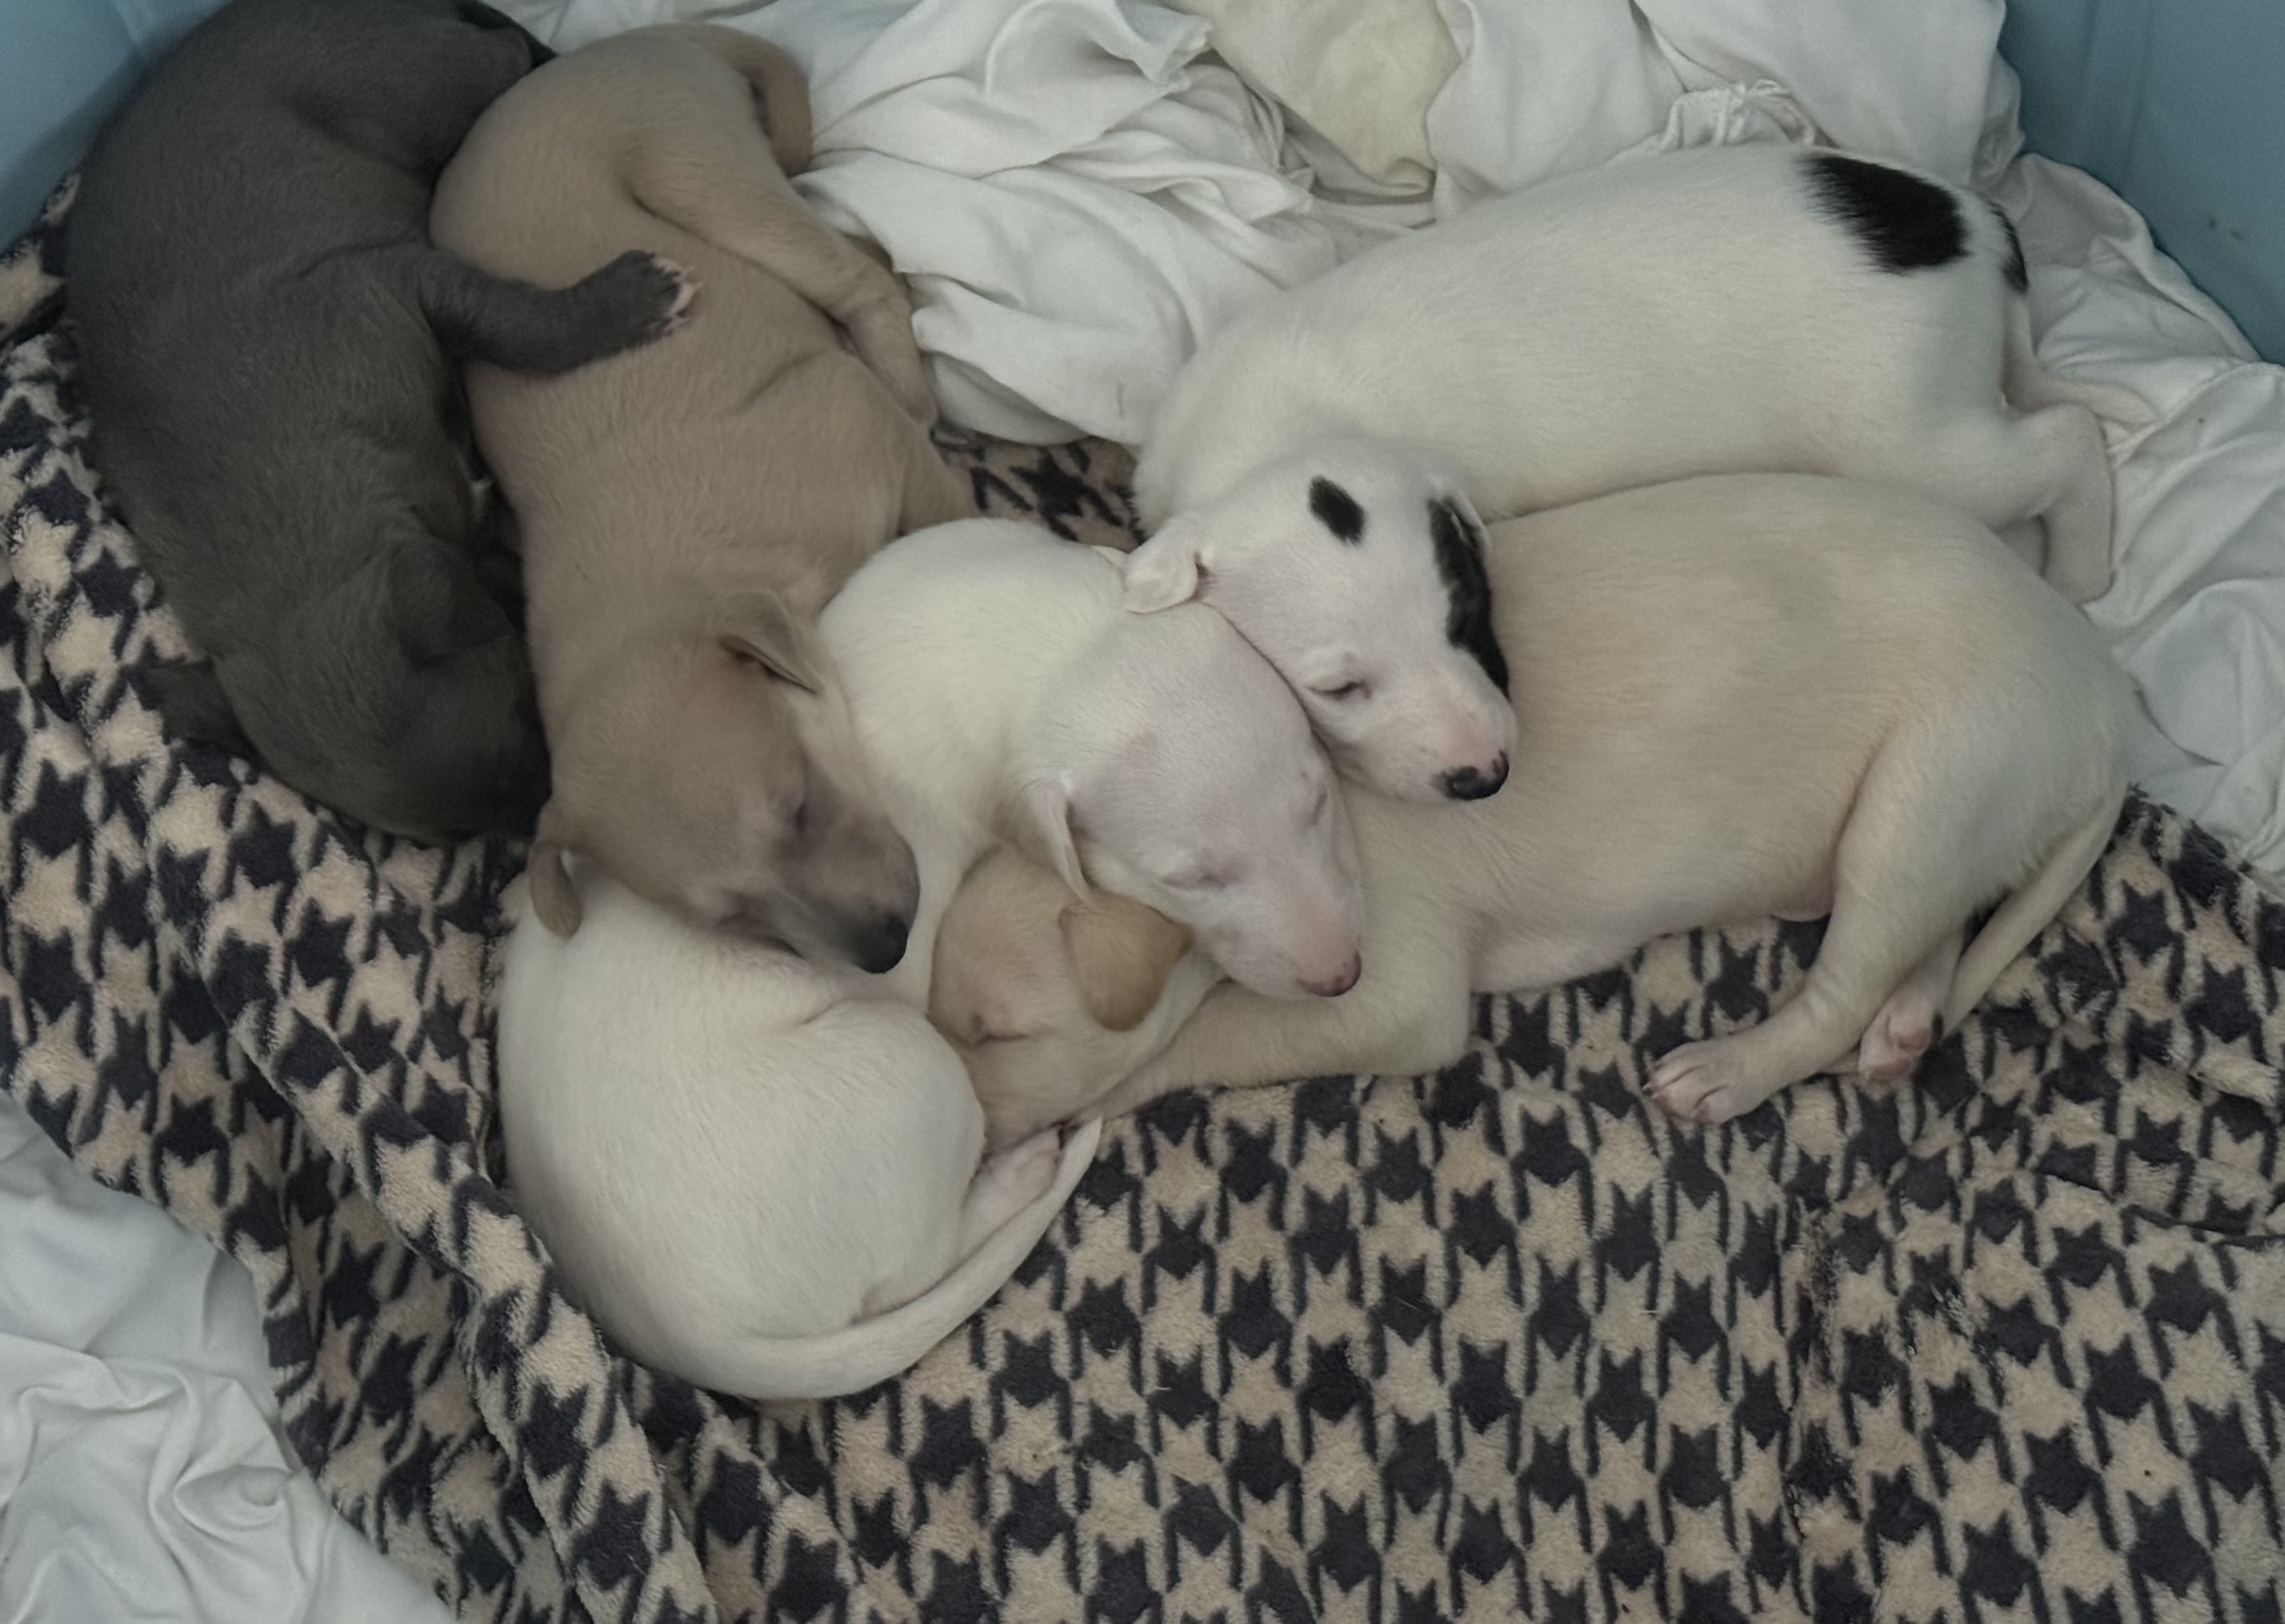 Puppies that are available for sale